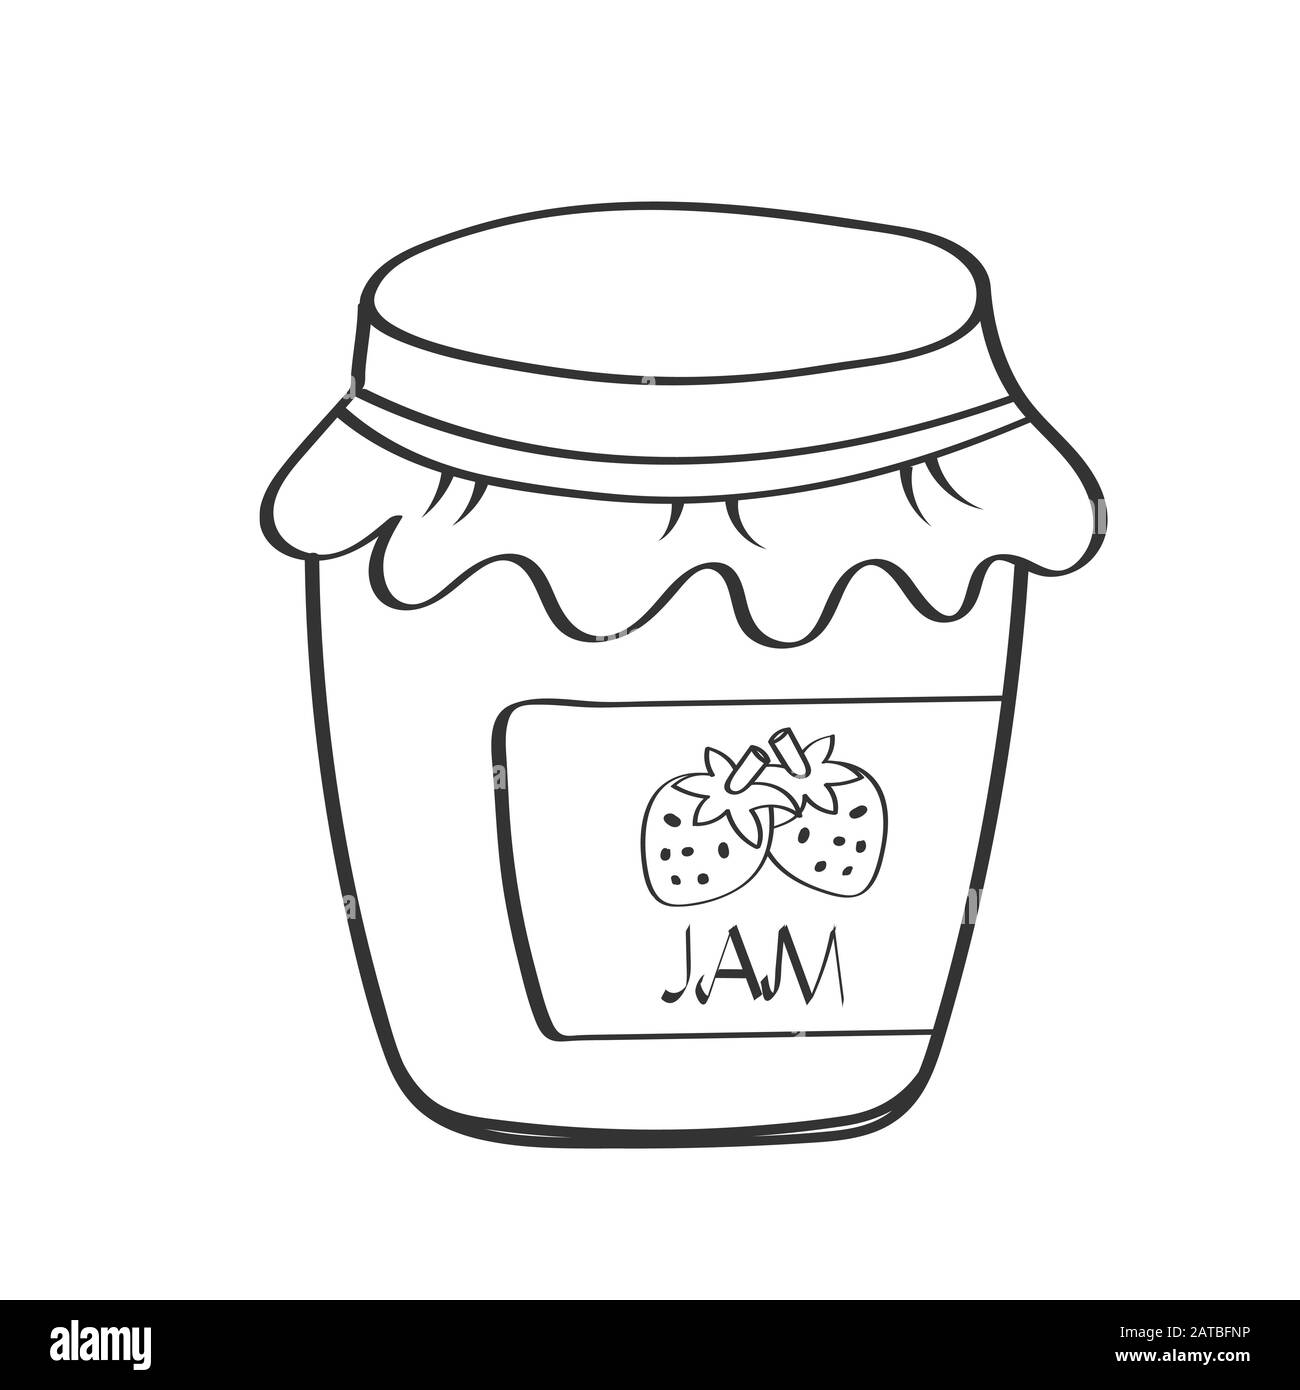 Premium Vector  Cute jar of strawberry jam isolated on white background  hand drawn illustration in doodle style